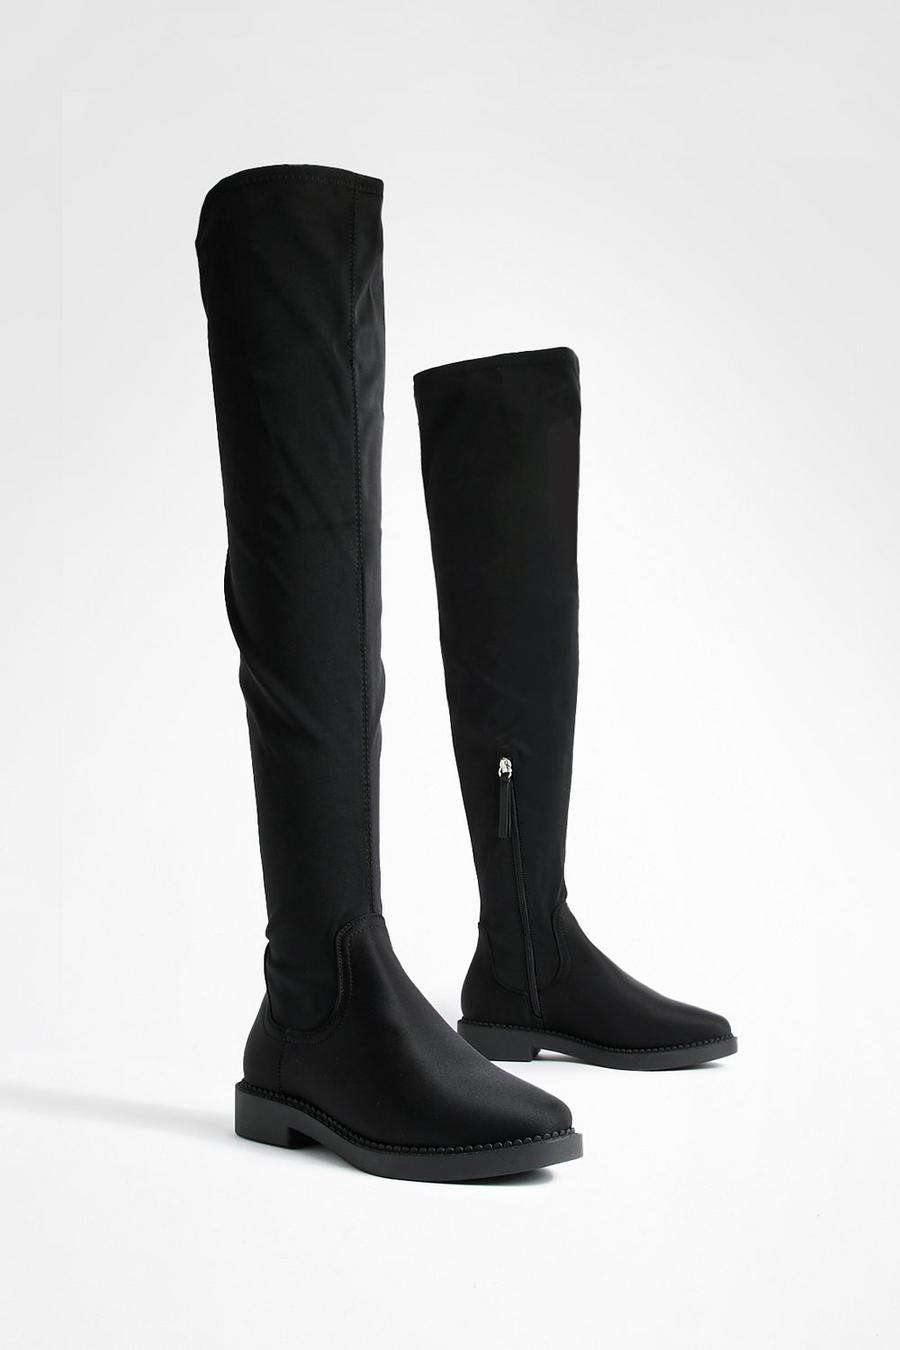 Black Wide Width Flat Stretch Over The Knee Boots